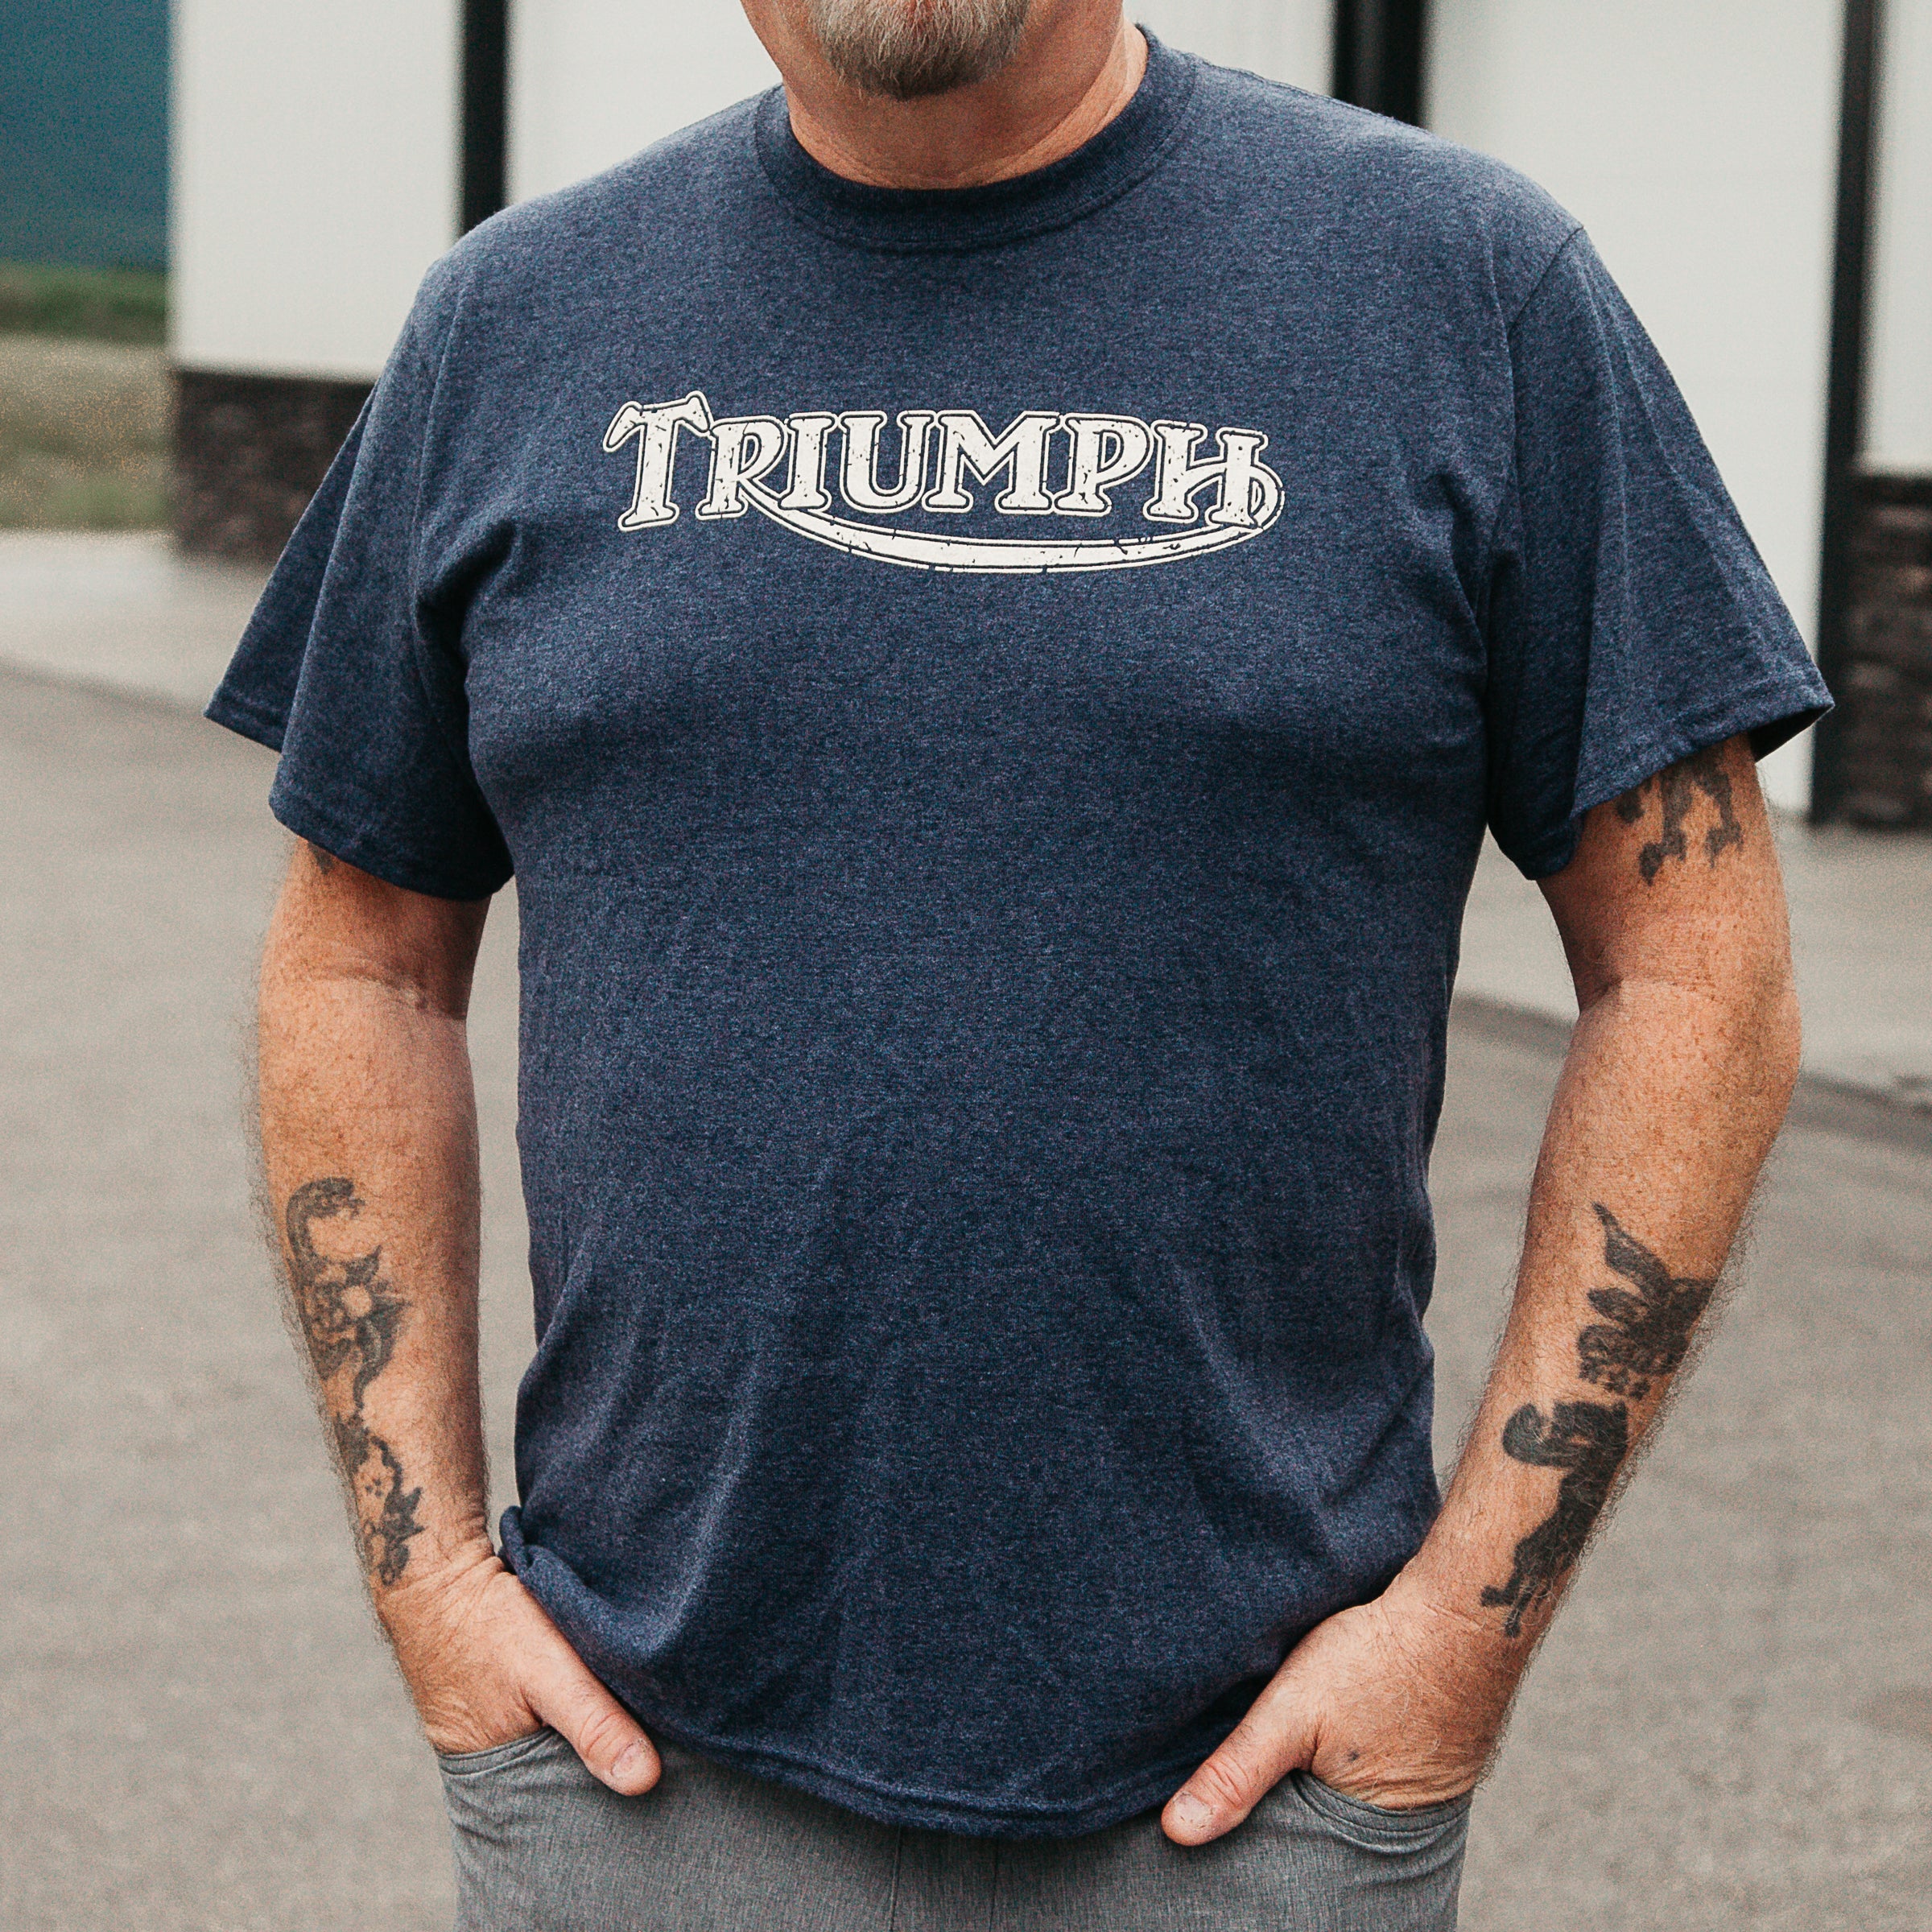 Dreamcycle Motorcycle Museum |  Man modeling Triumph tshirt in lifestyle environment. 